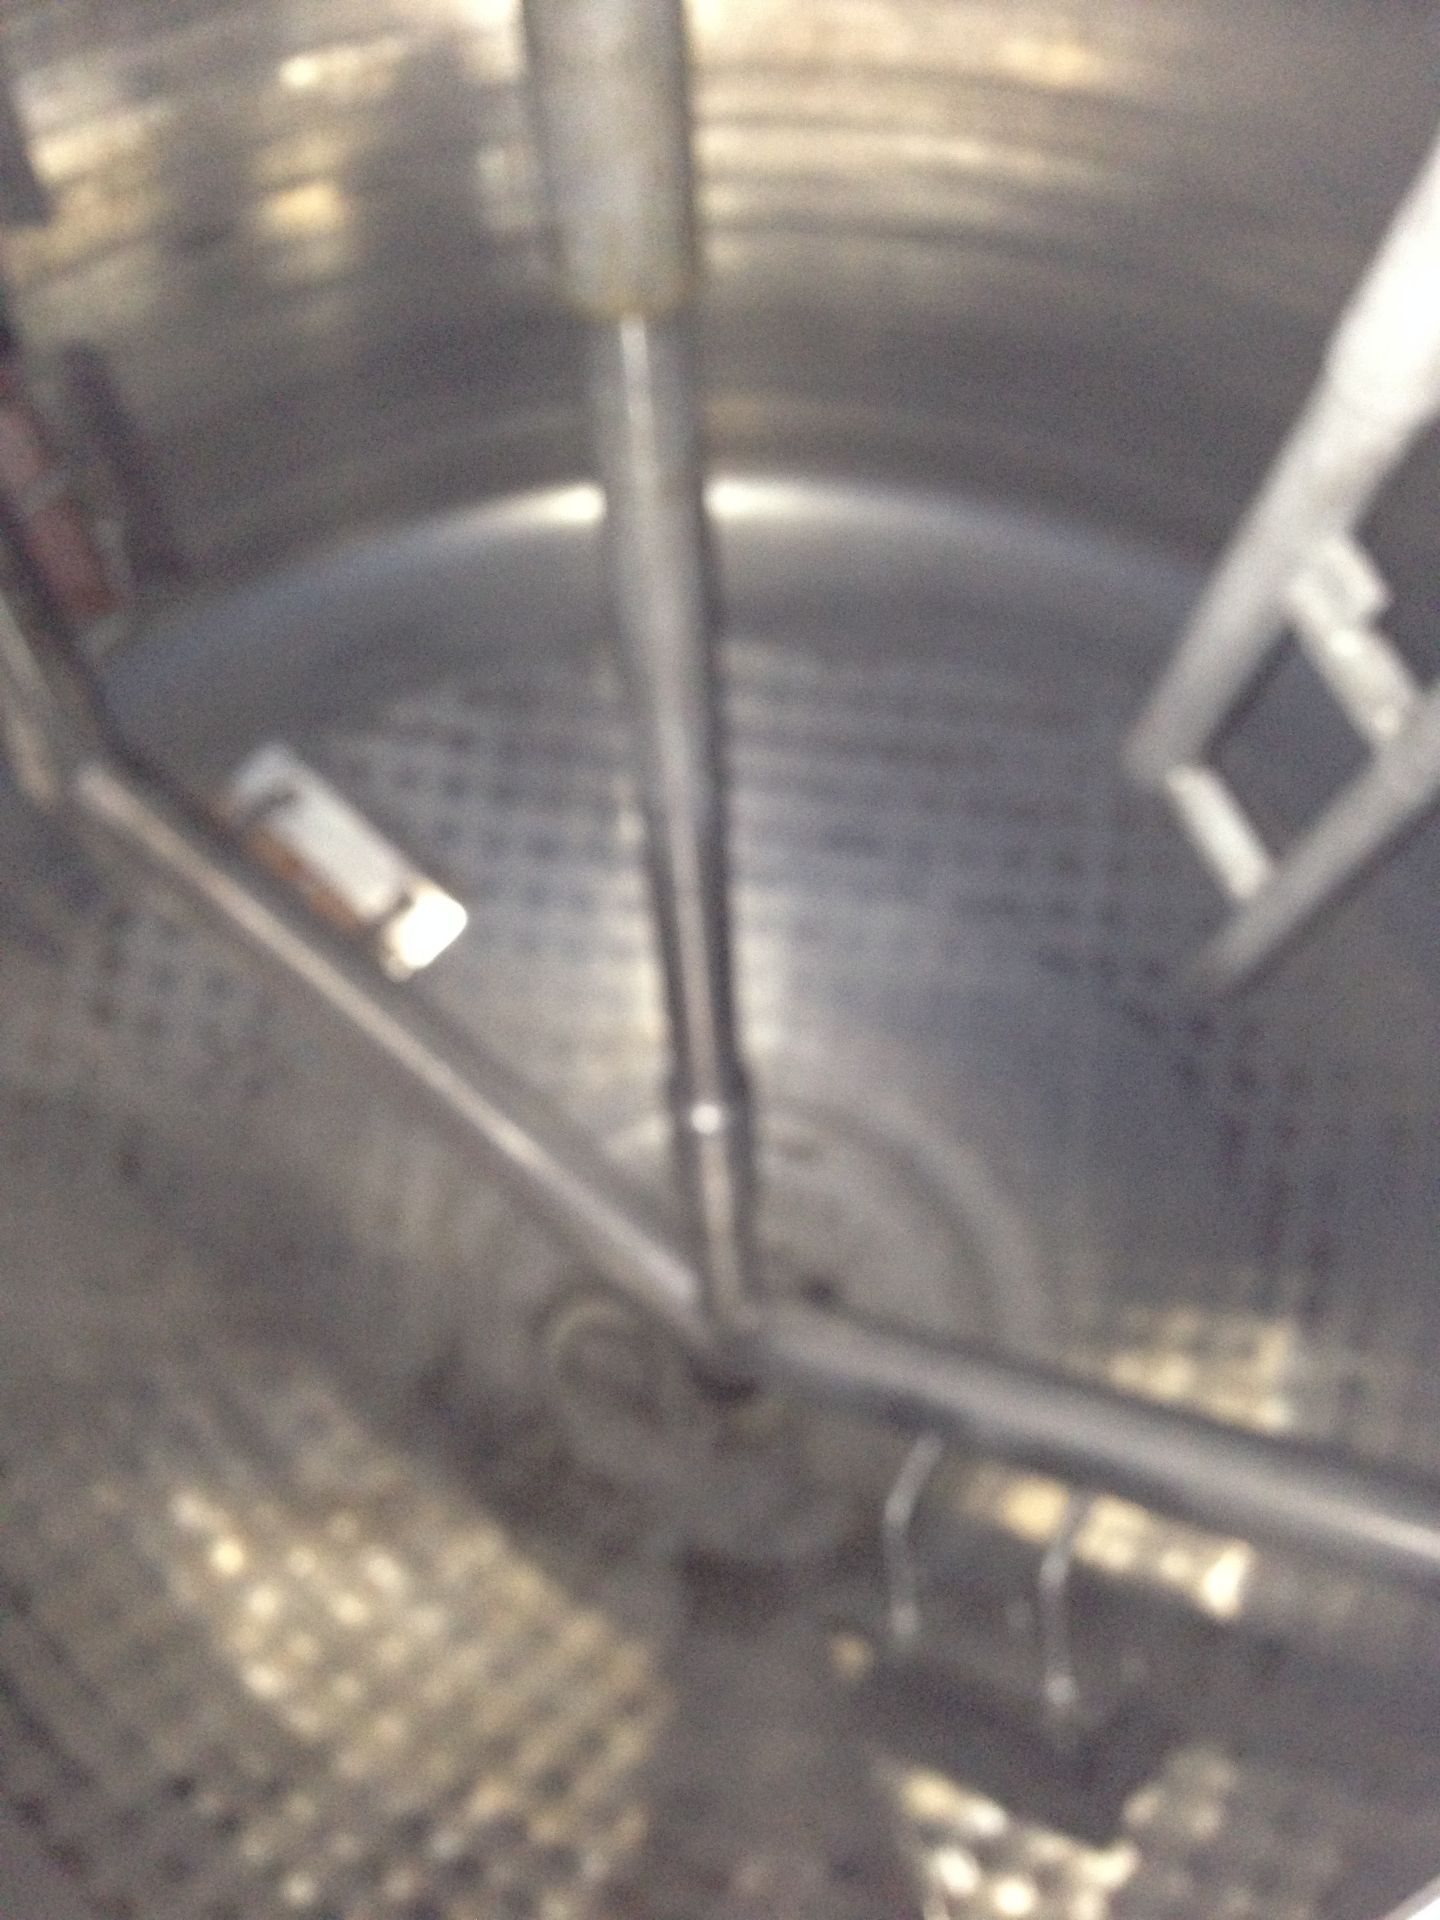 Cherry-Burrell 500 Gallon Jacketed Processor Tank Serial: E-313-90 Year: 1990316L Stainless Steel - Image 7 of 10